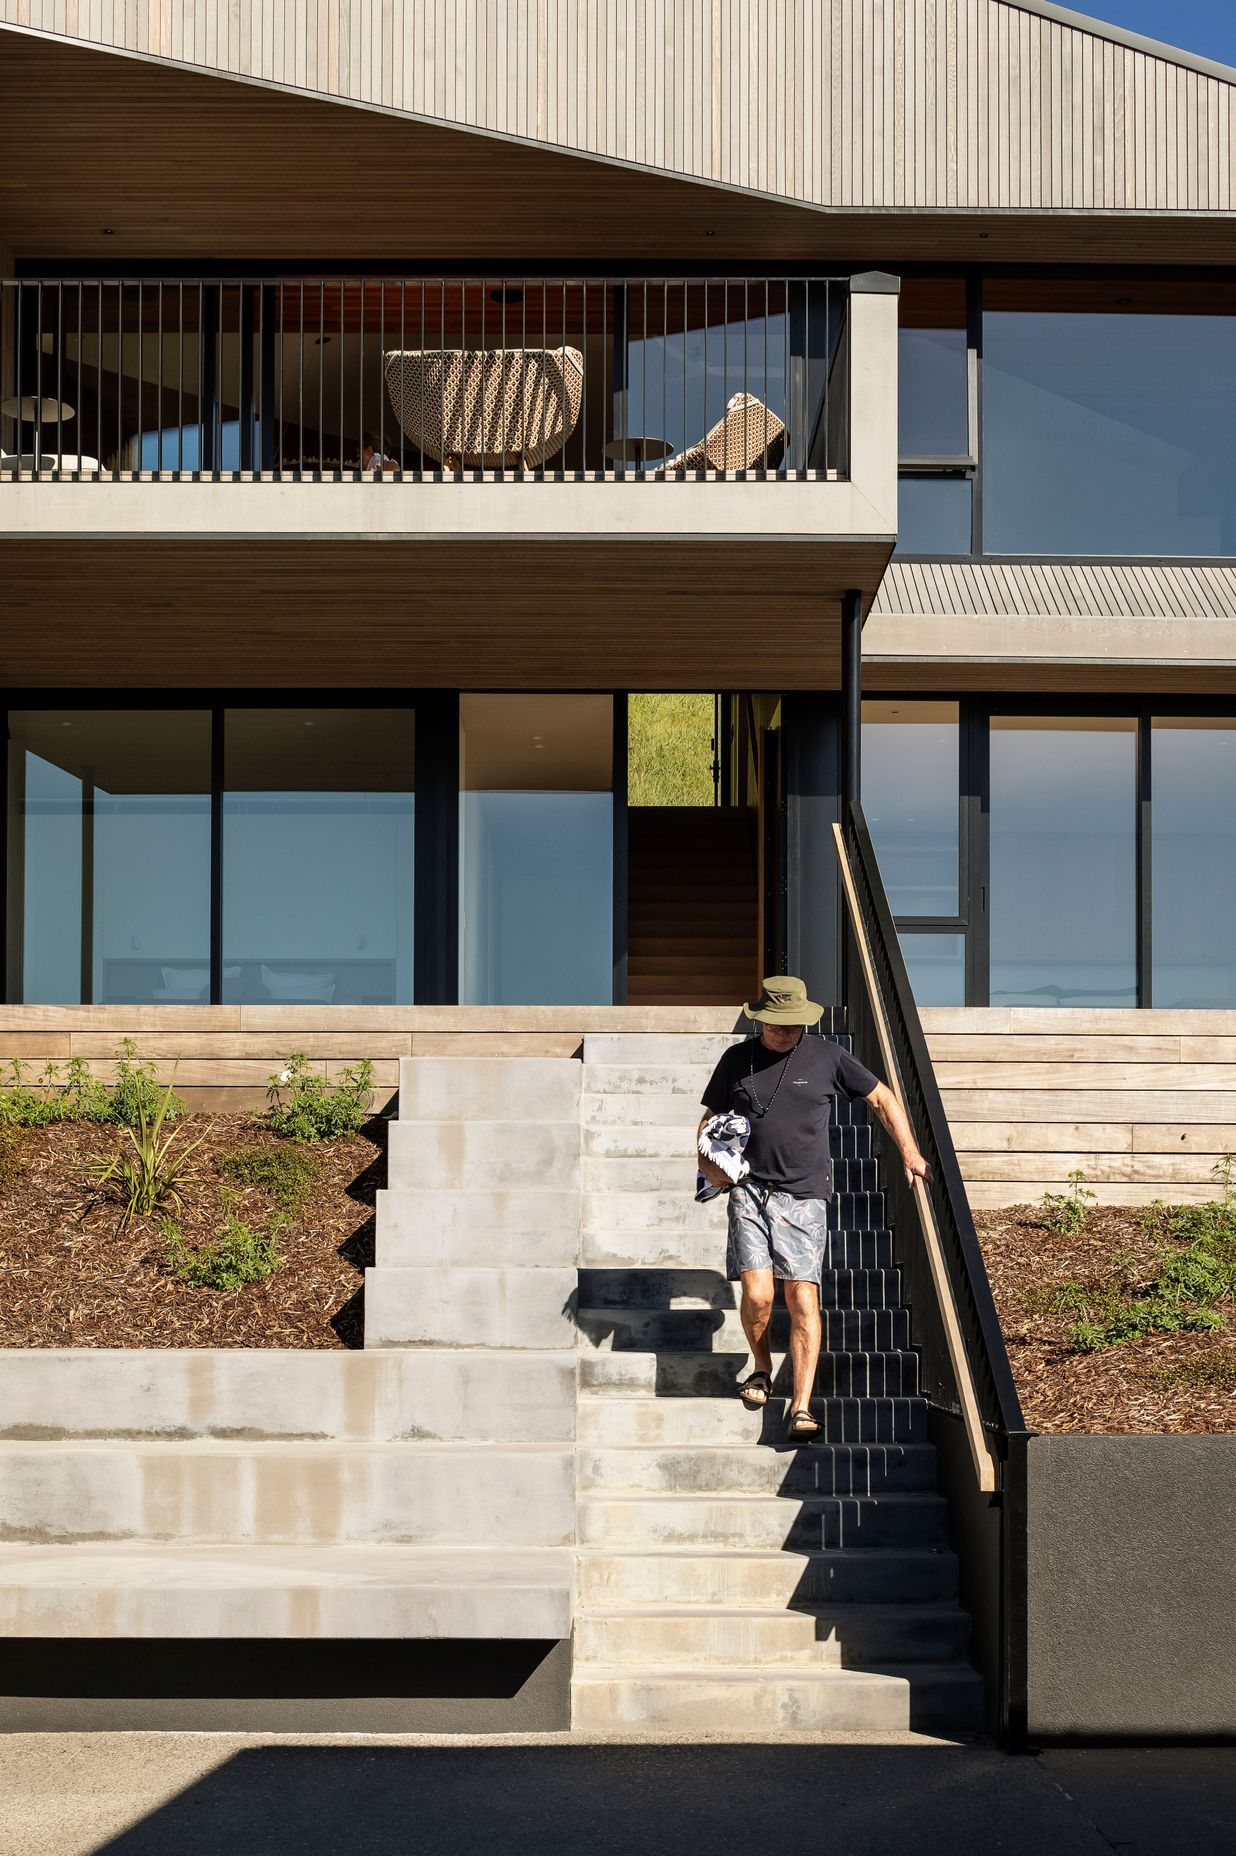 Concrete plinths alongside the stair provide a spot to congregate or leave kayaks and surf boards.